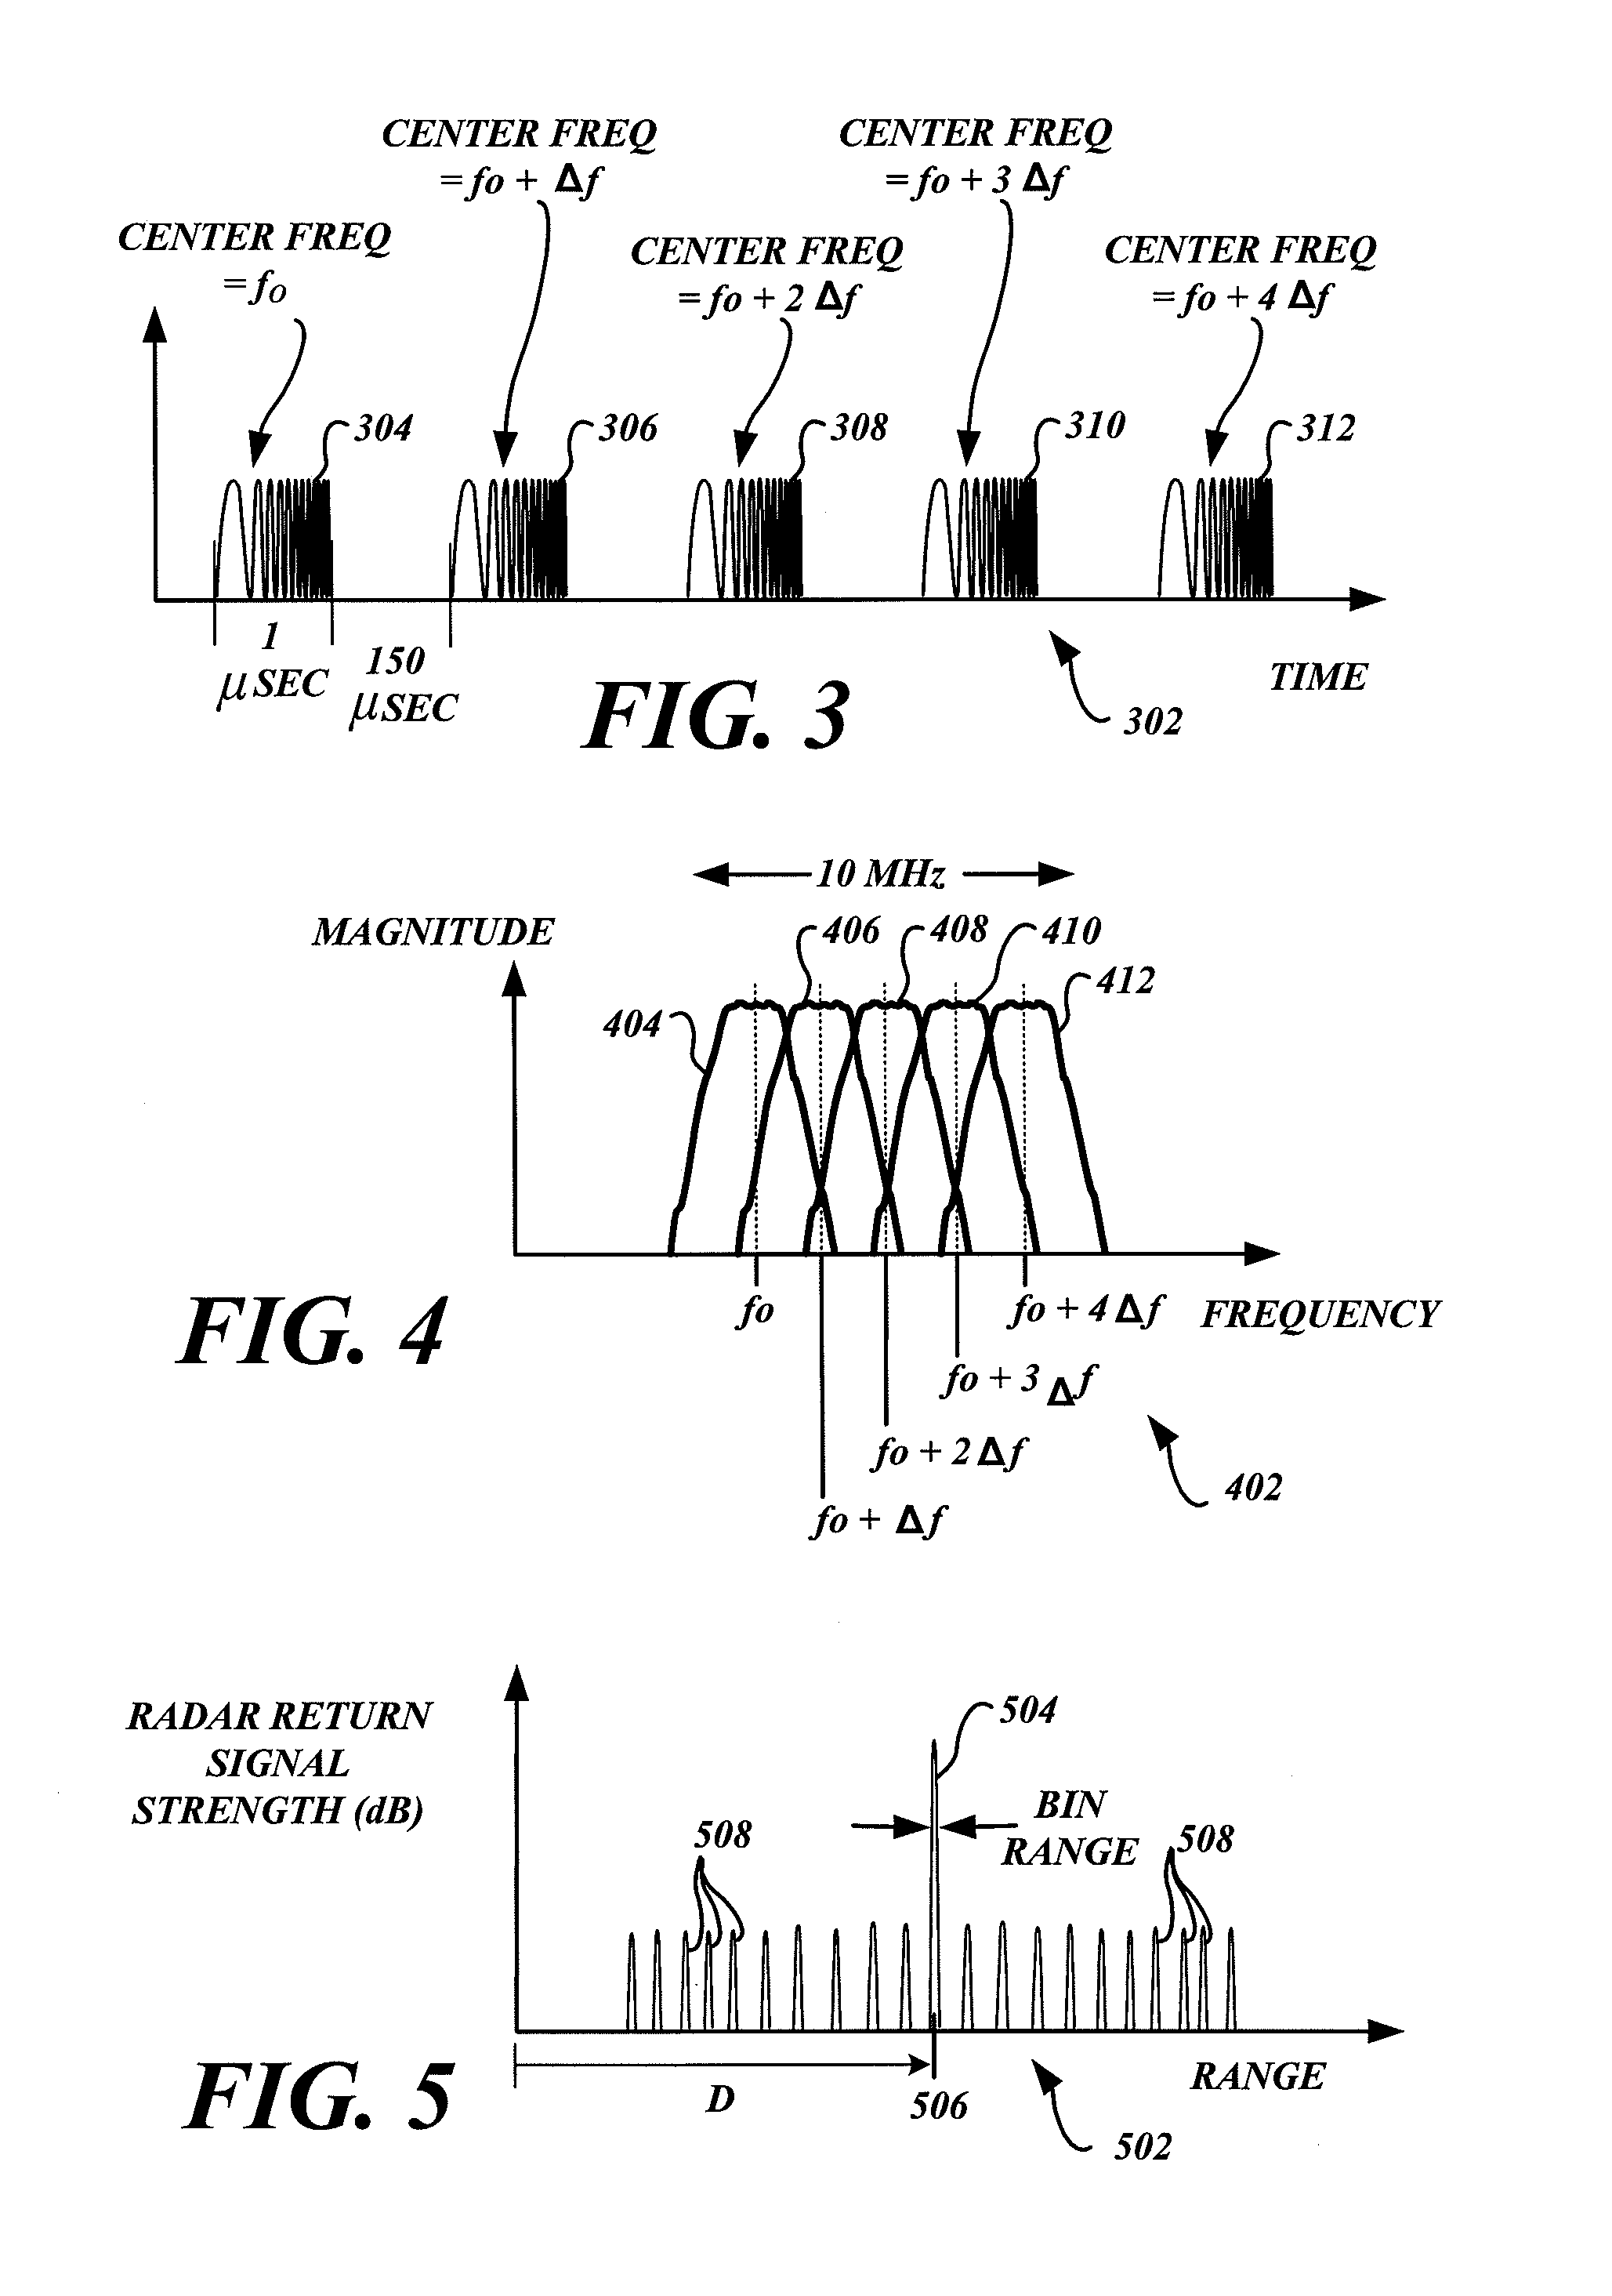 Systems and methods for suppressing ambiguous peaks from stepped frequency techniques